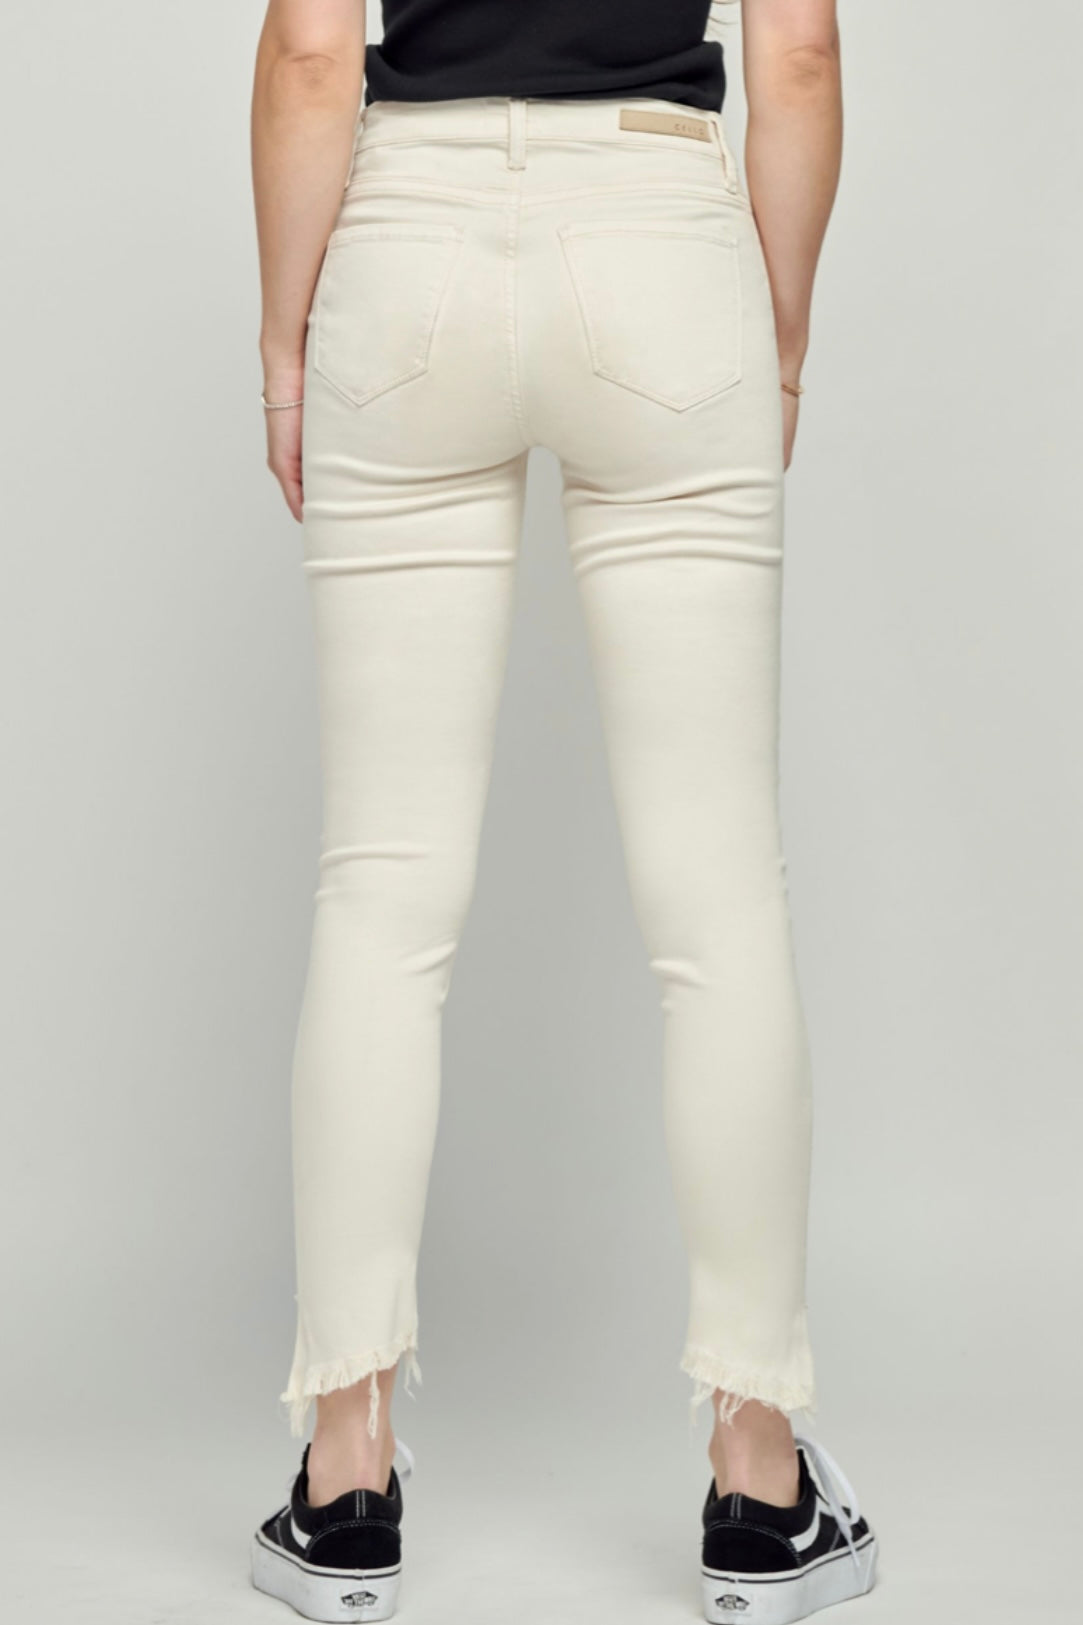 $20 SALE! Unbleached Cello Mid Rise Crop Skinny with Fray Hem